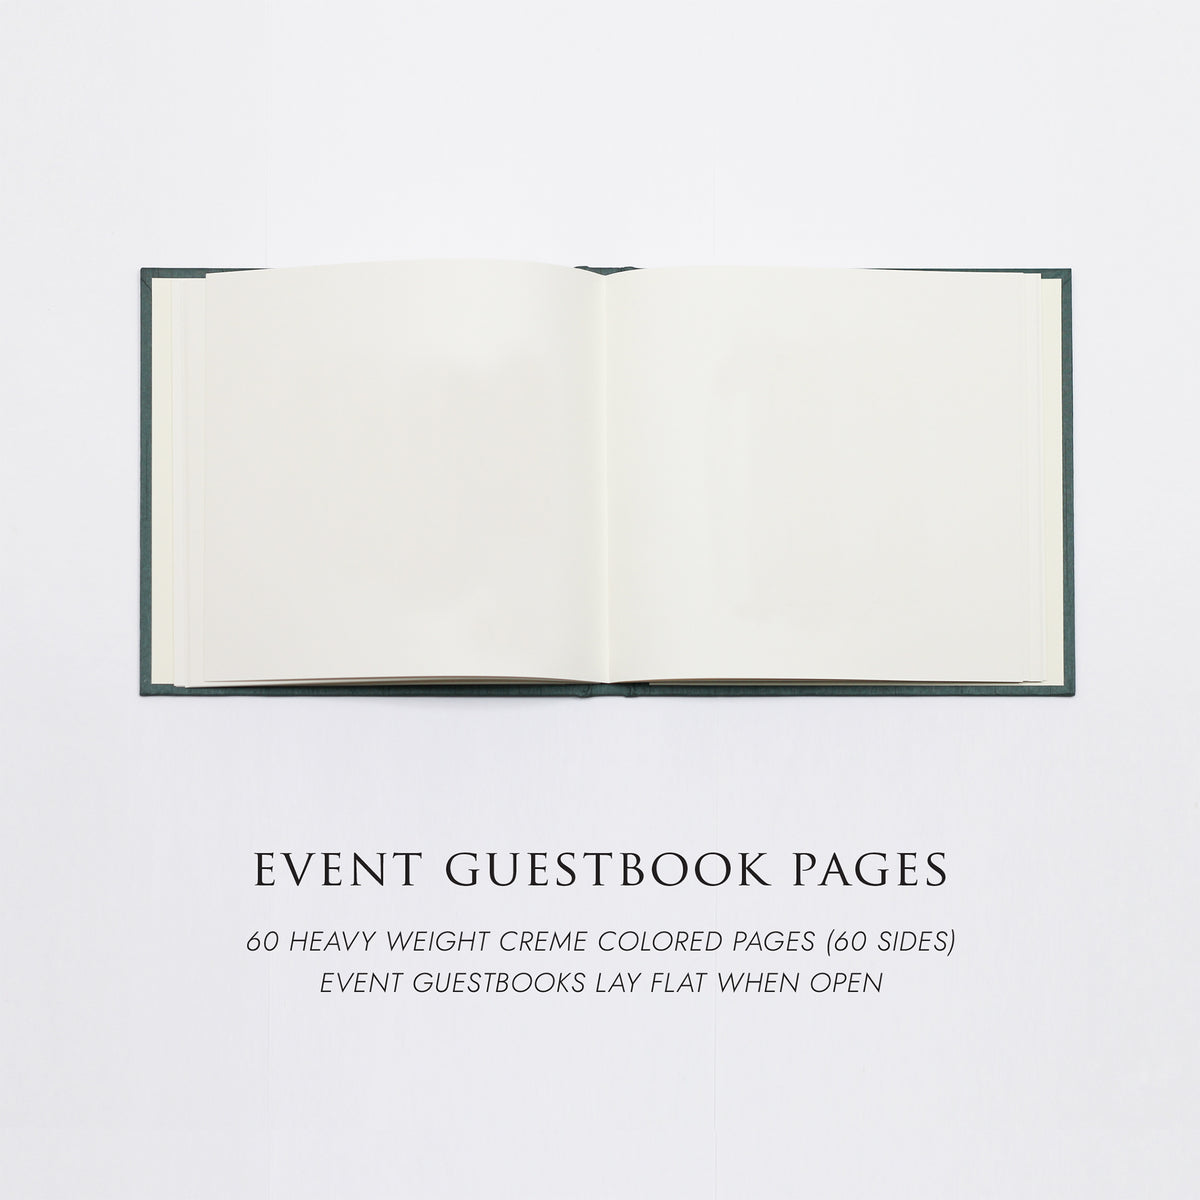 Event Guestbook | Cover: Natural Linen | Available Personalized